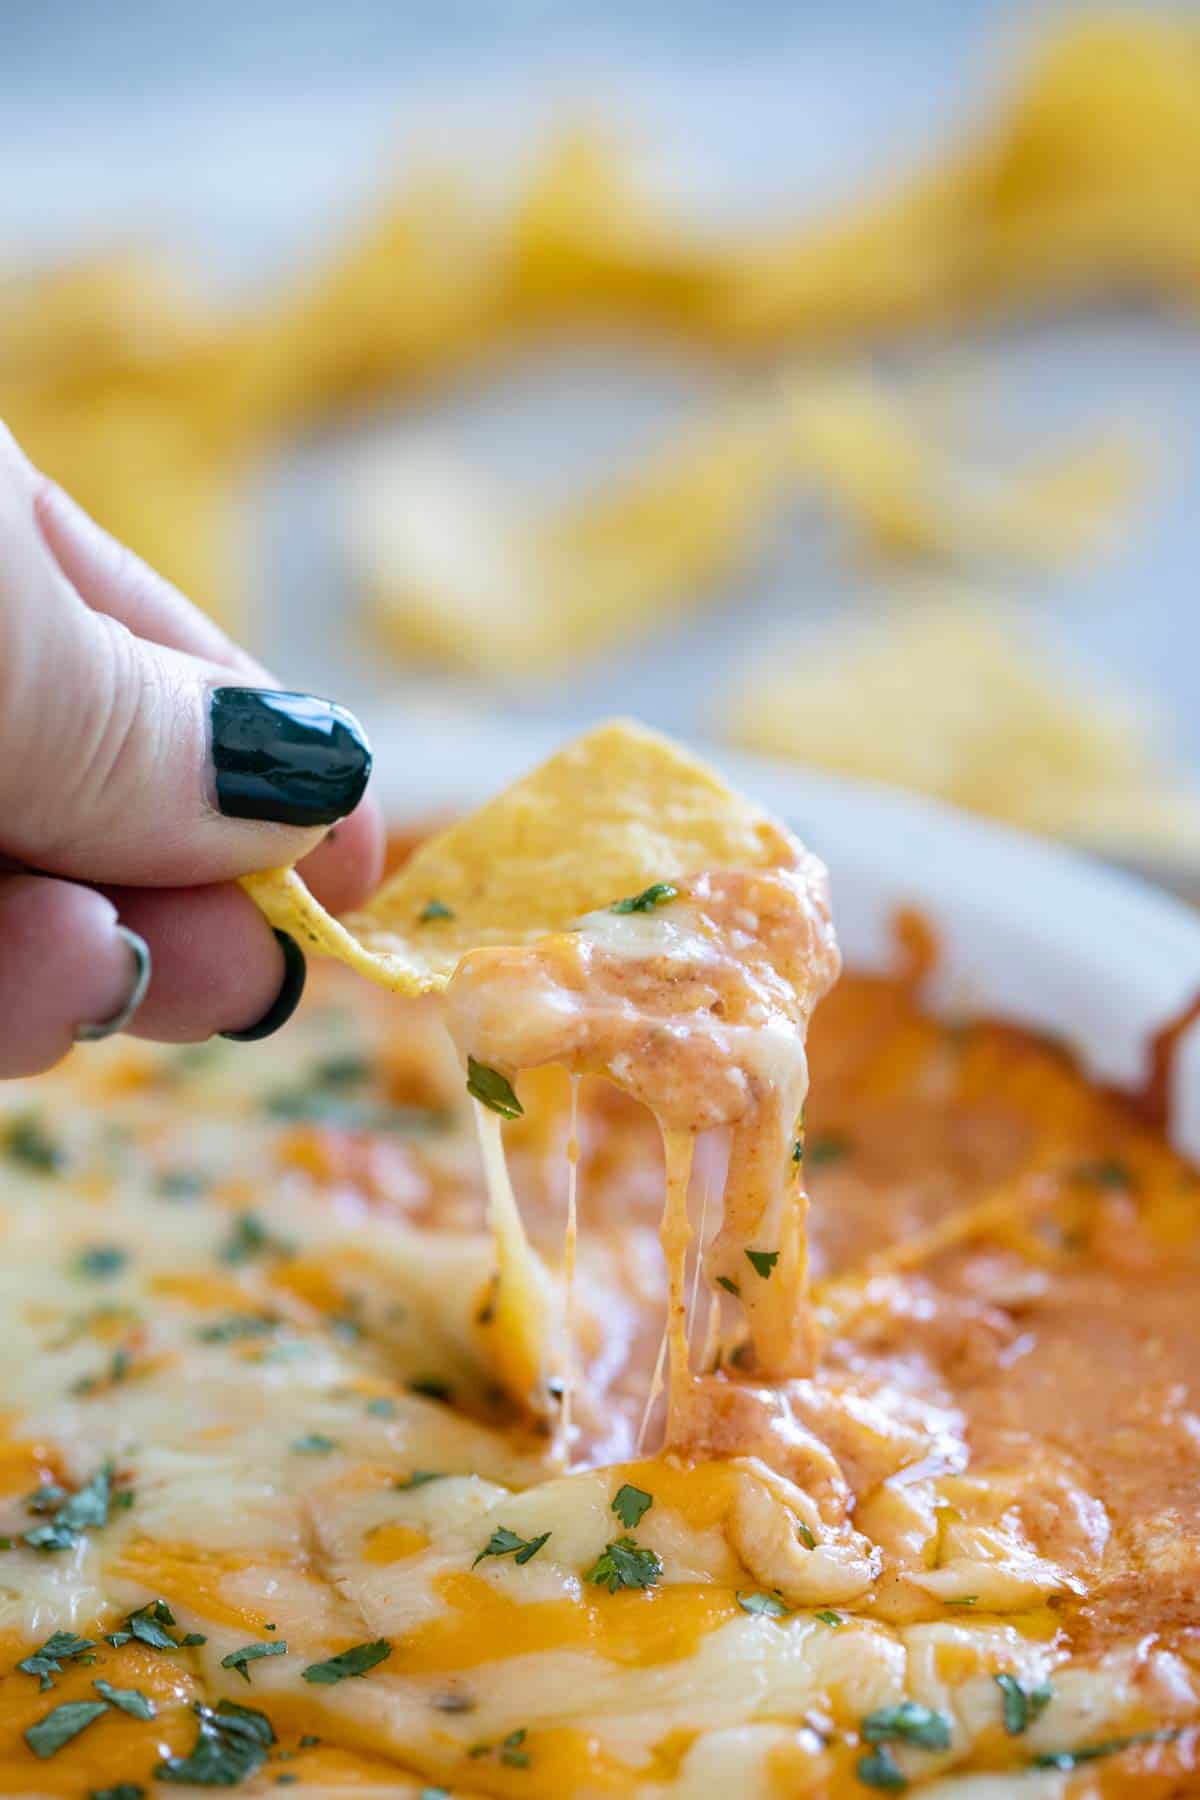 Chip with cheese pull from Cheesy Mexican Dip.